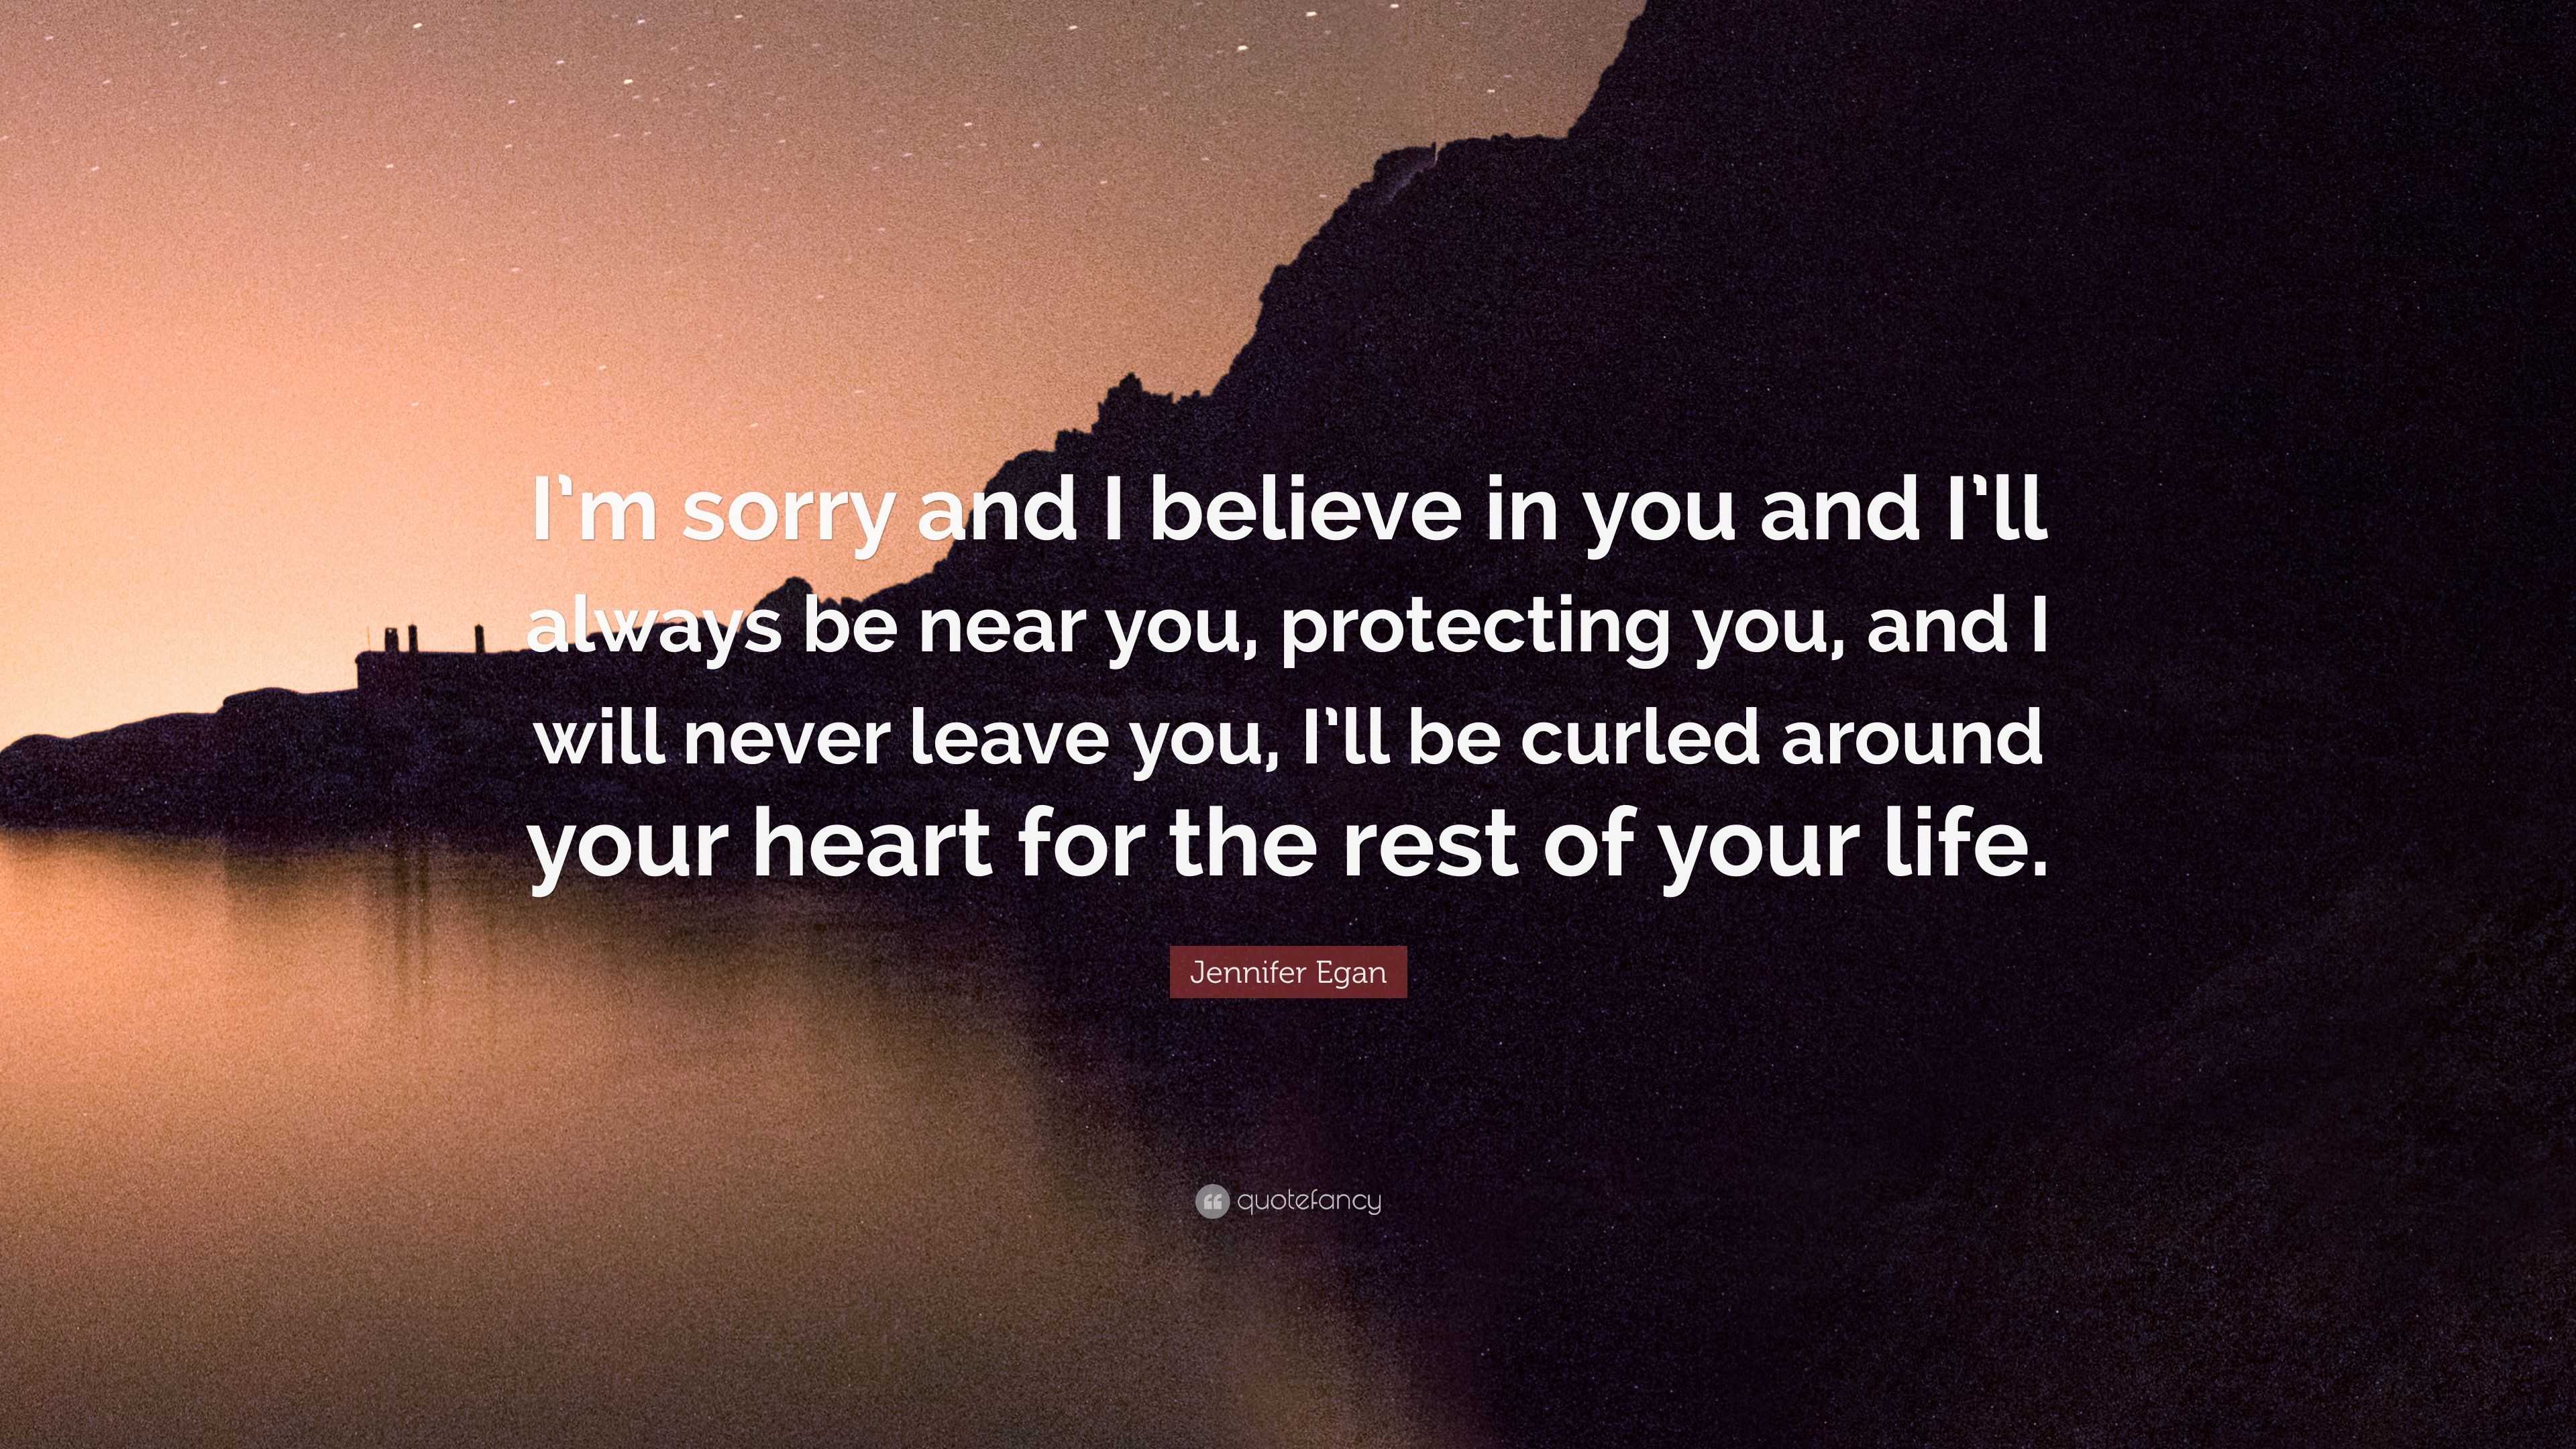 Jennifer Egan Quote “I m sorry and I believe in you and I